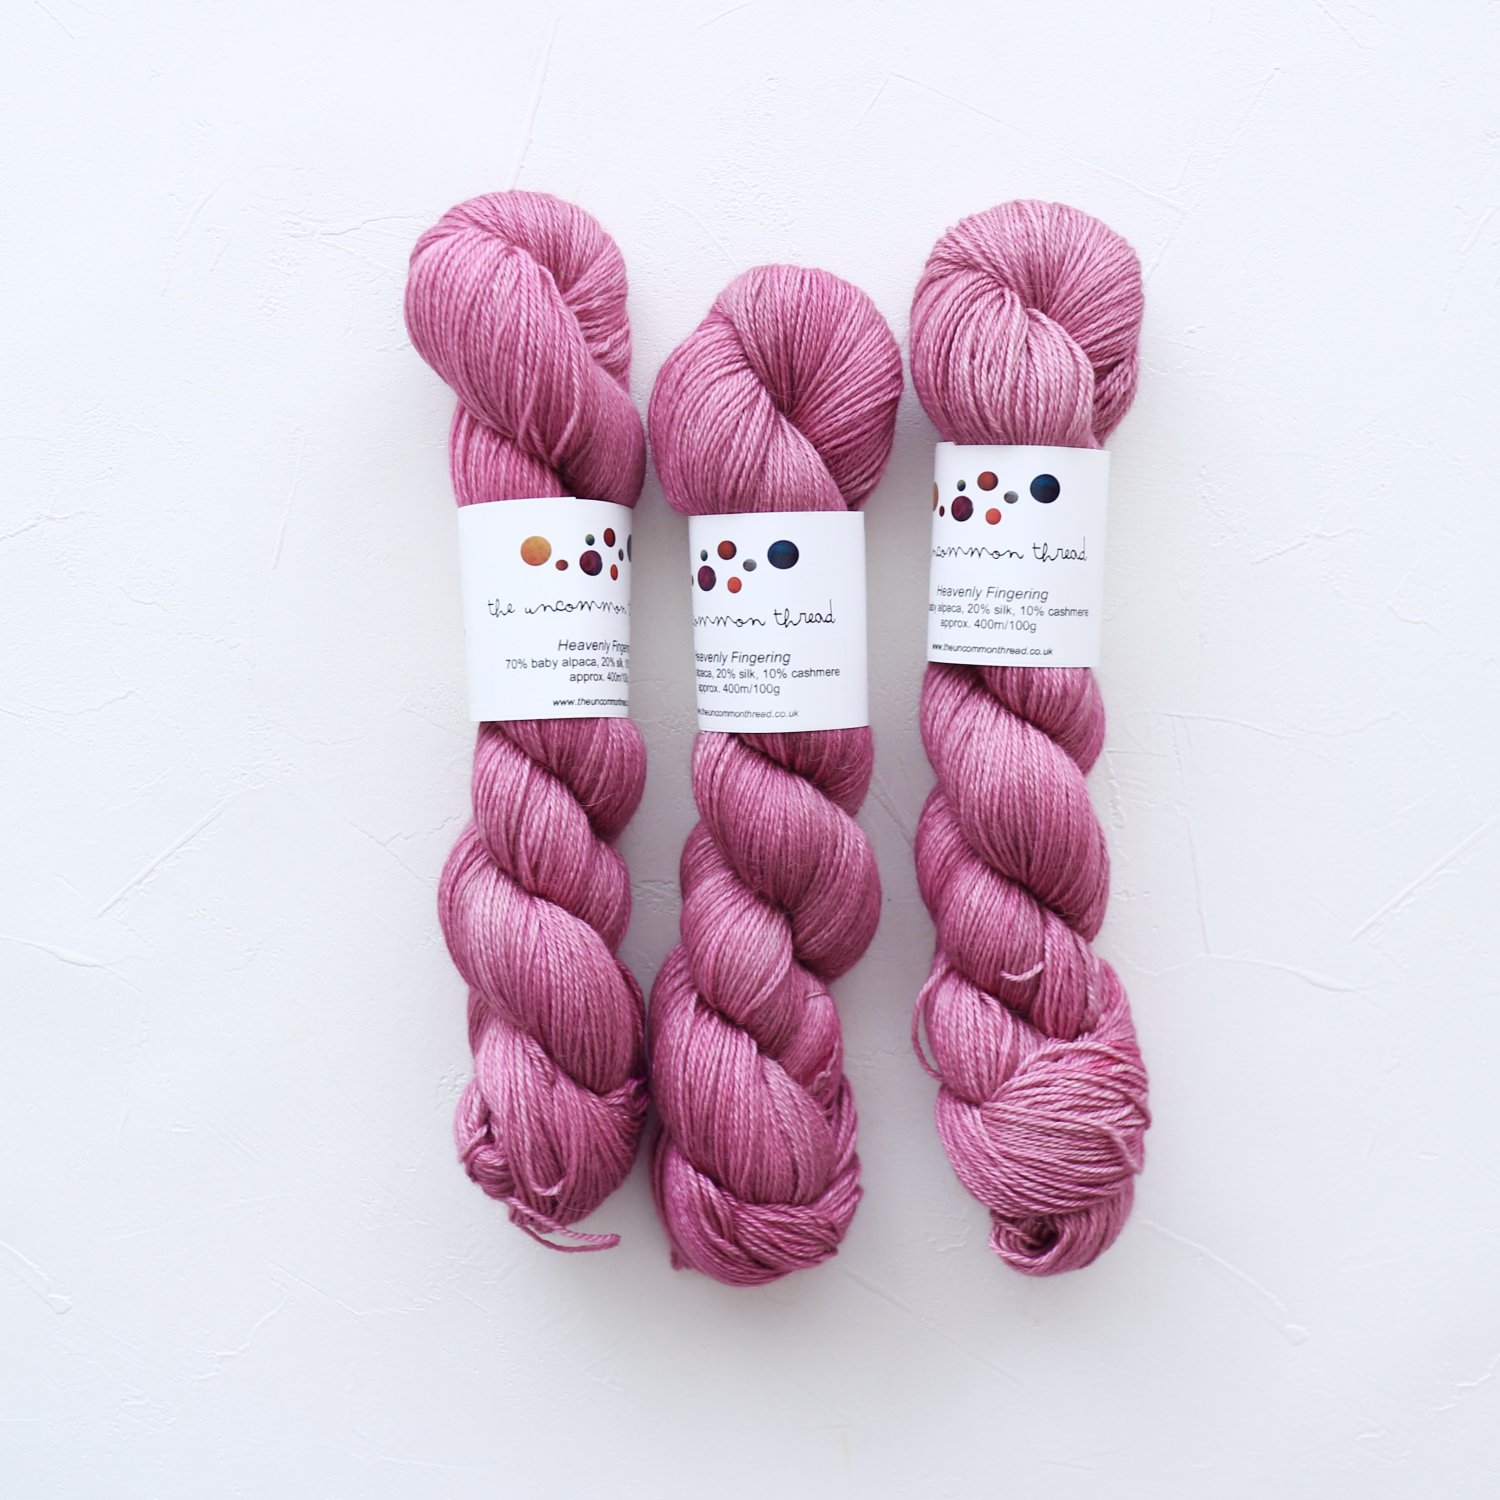 【The Uncommon Thread】<br>Heavenly Fingering<br>Wilted Rose